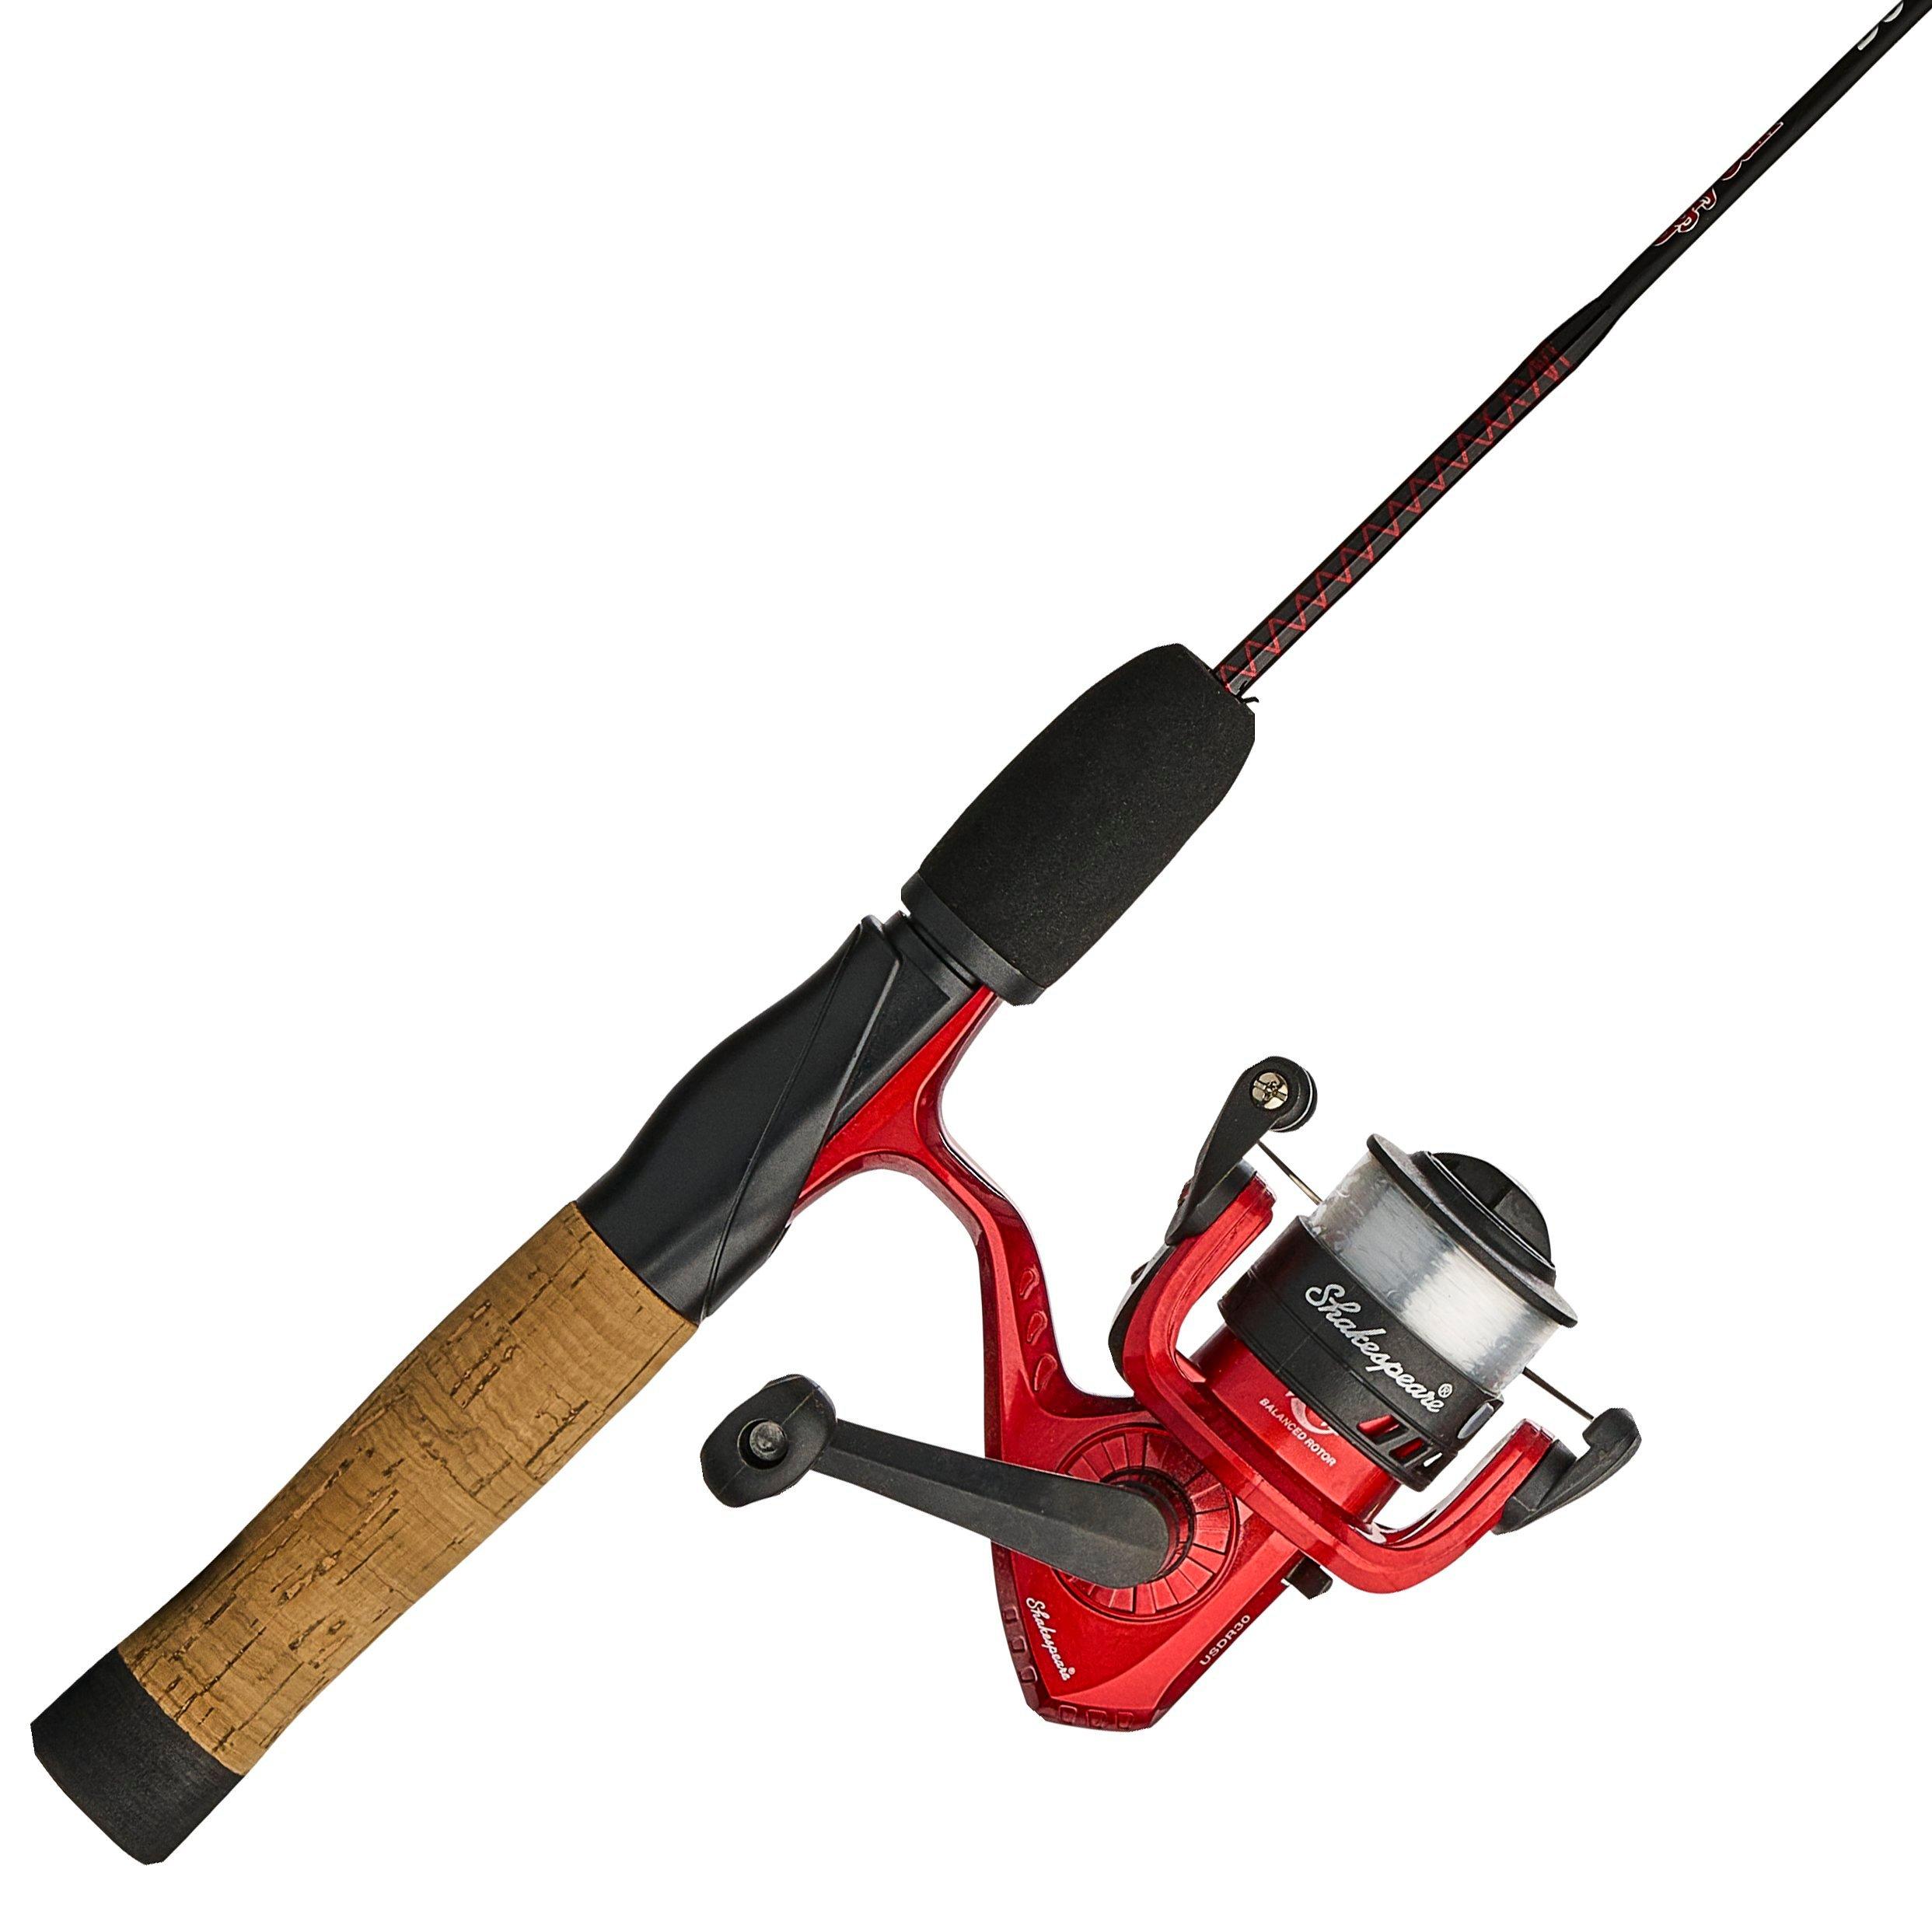 Sealife Marine Ltd - 🔥NEW ARRIVALS🔥 SHAKESPEARE UGLY STIK DOCK RUNNER  $190 36 Ugly Stik rod Cork and EVA grips with twist lock reel seats  Pre-spooled with 6 lb line 30 size